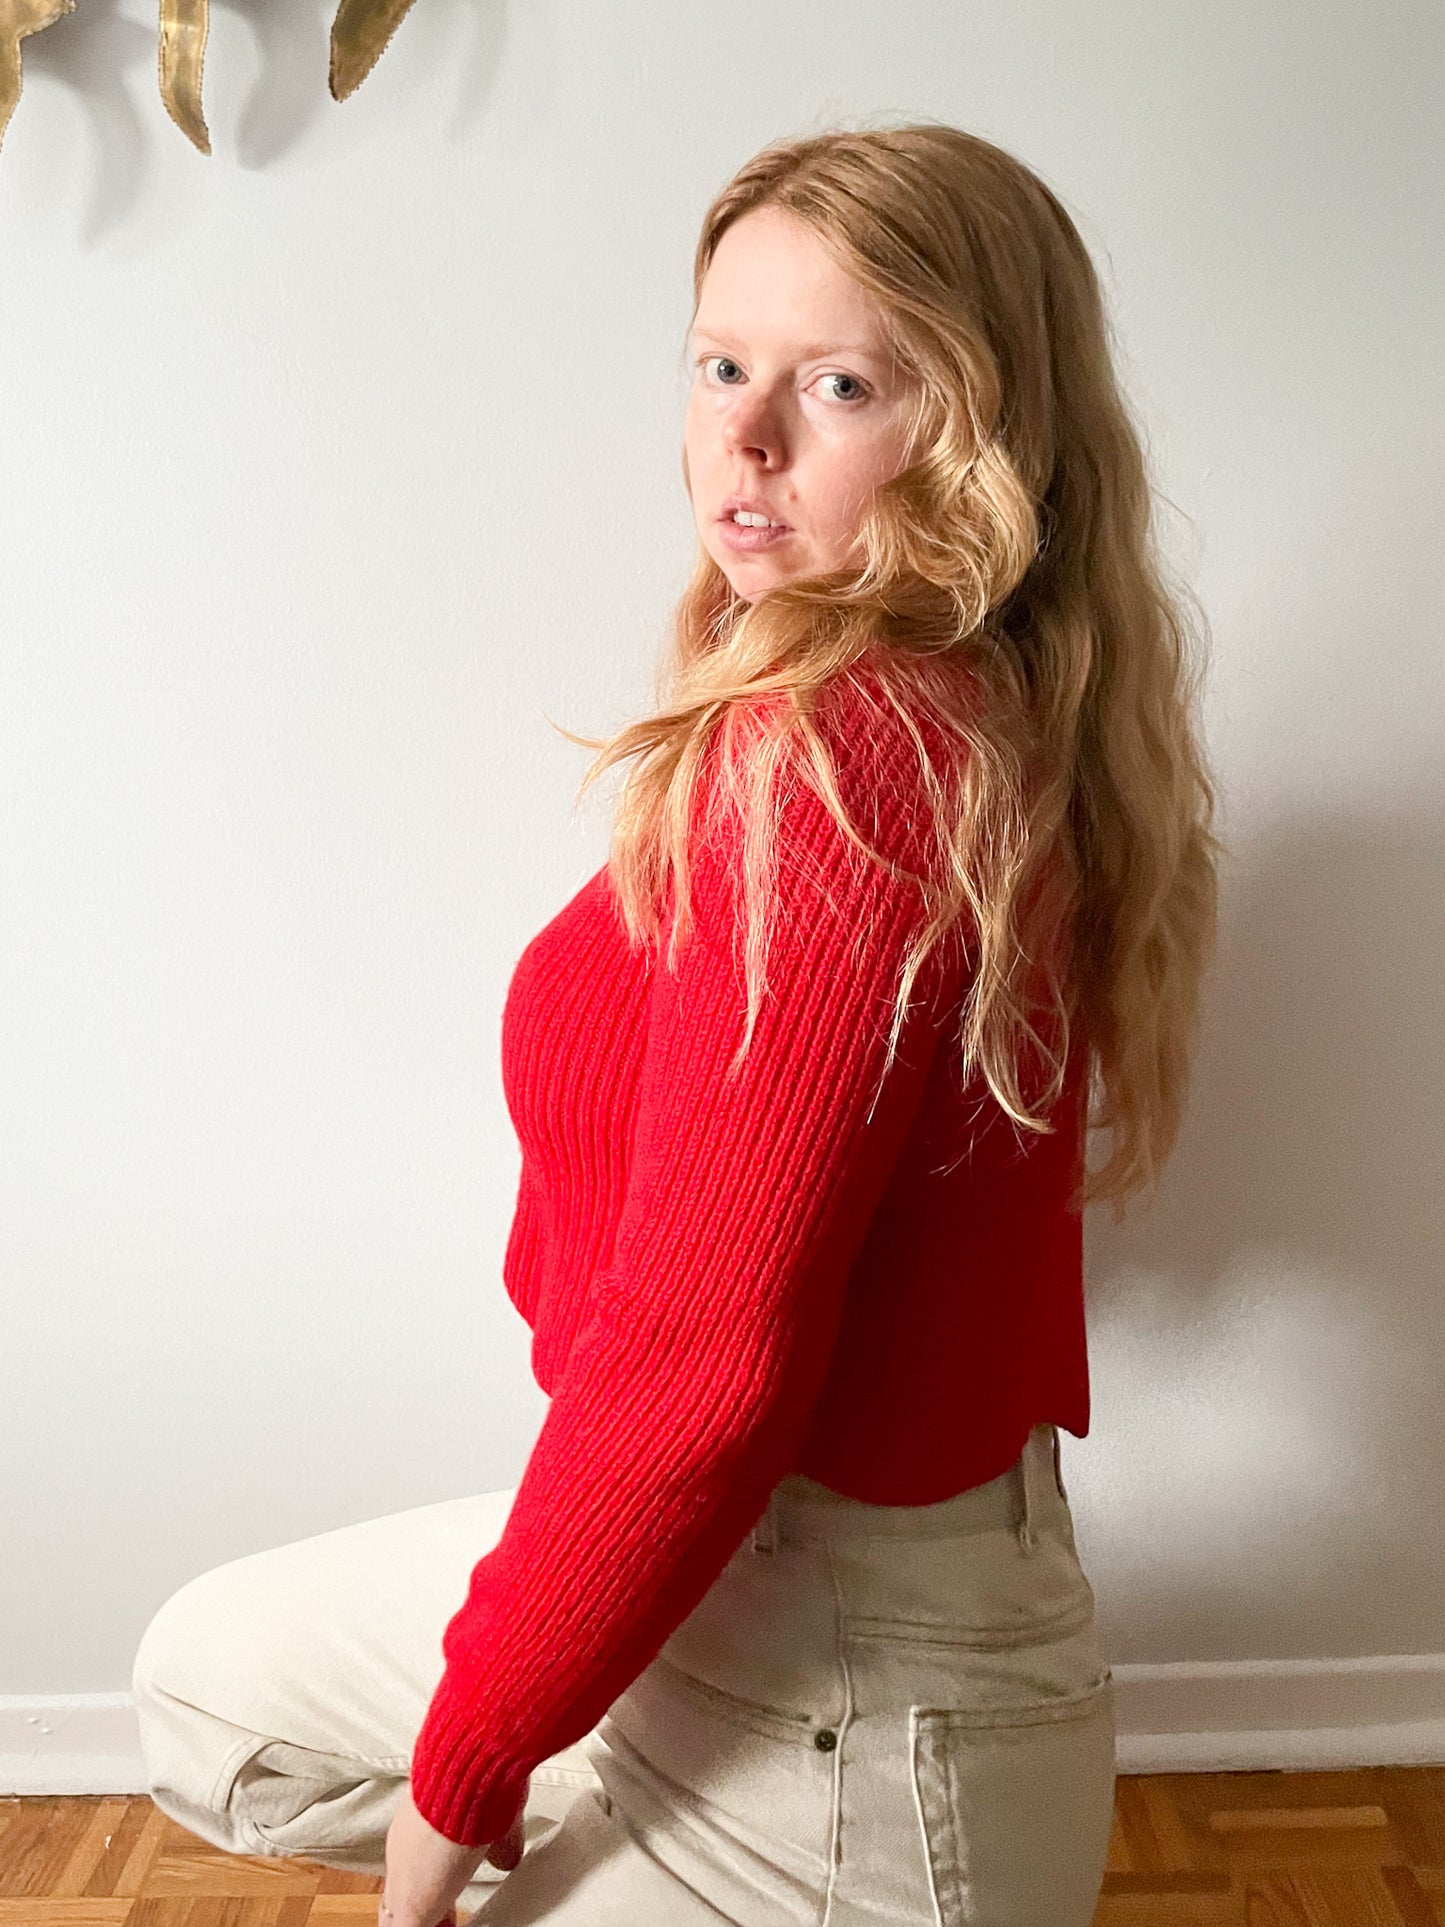 Wilfred Sardou Red Knit Scalloped Cropped 100% Wool Crew-Neck Sweater - S/M